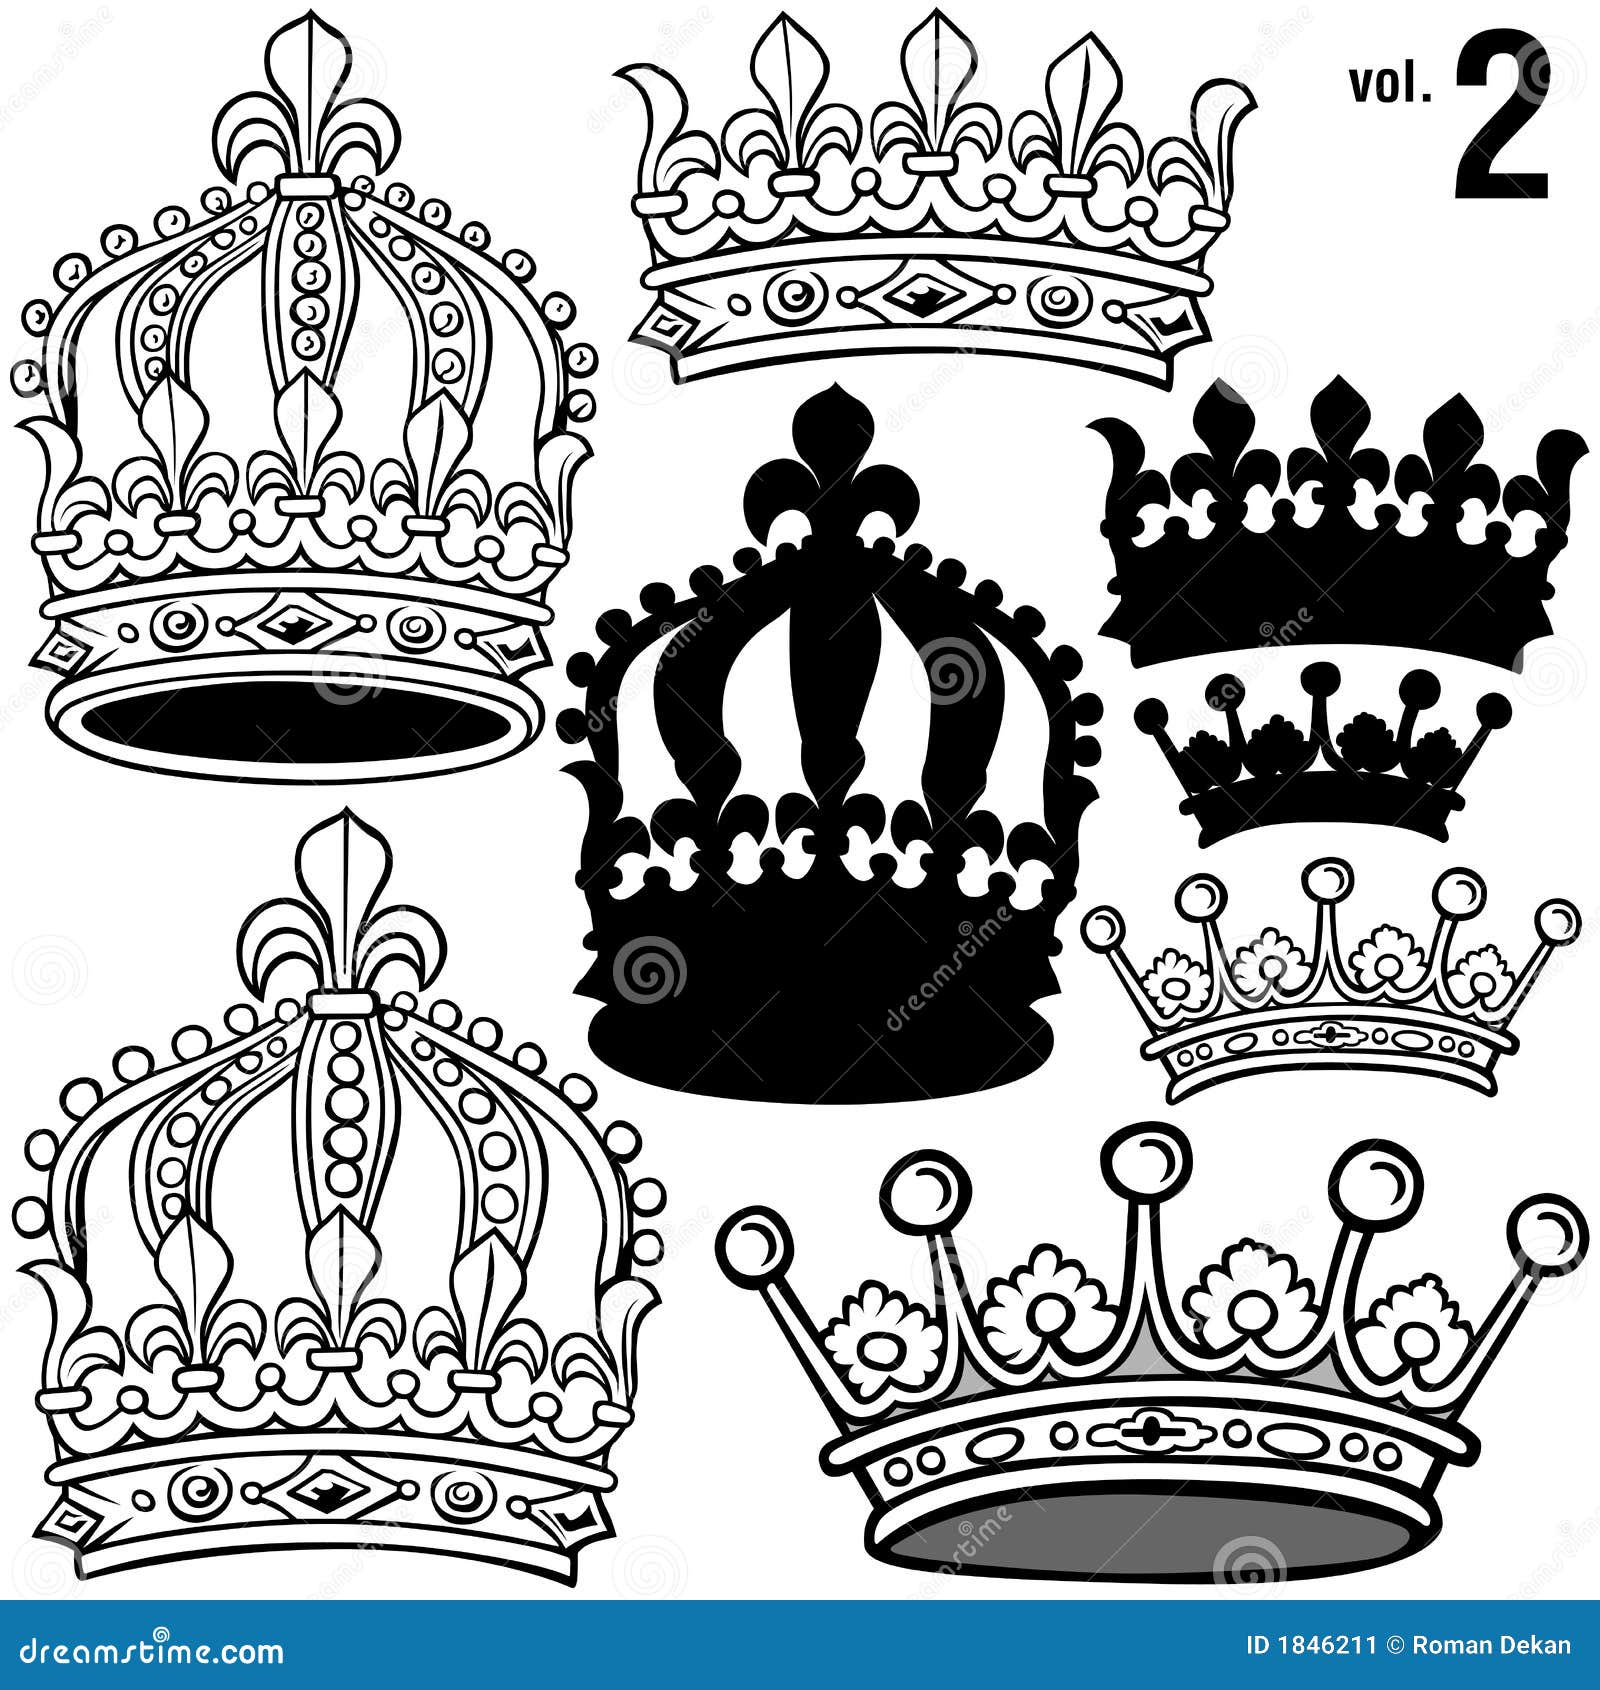 Royal Crowns vol.2 stock vector. Image of golden, kings - 1846211